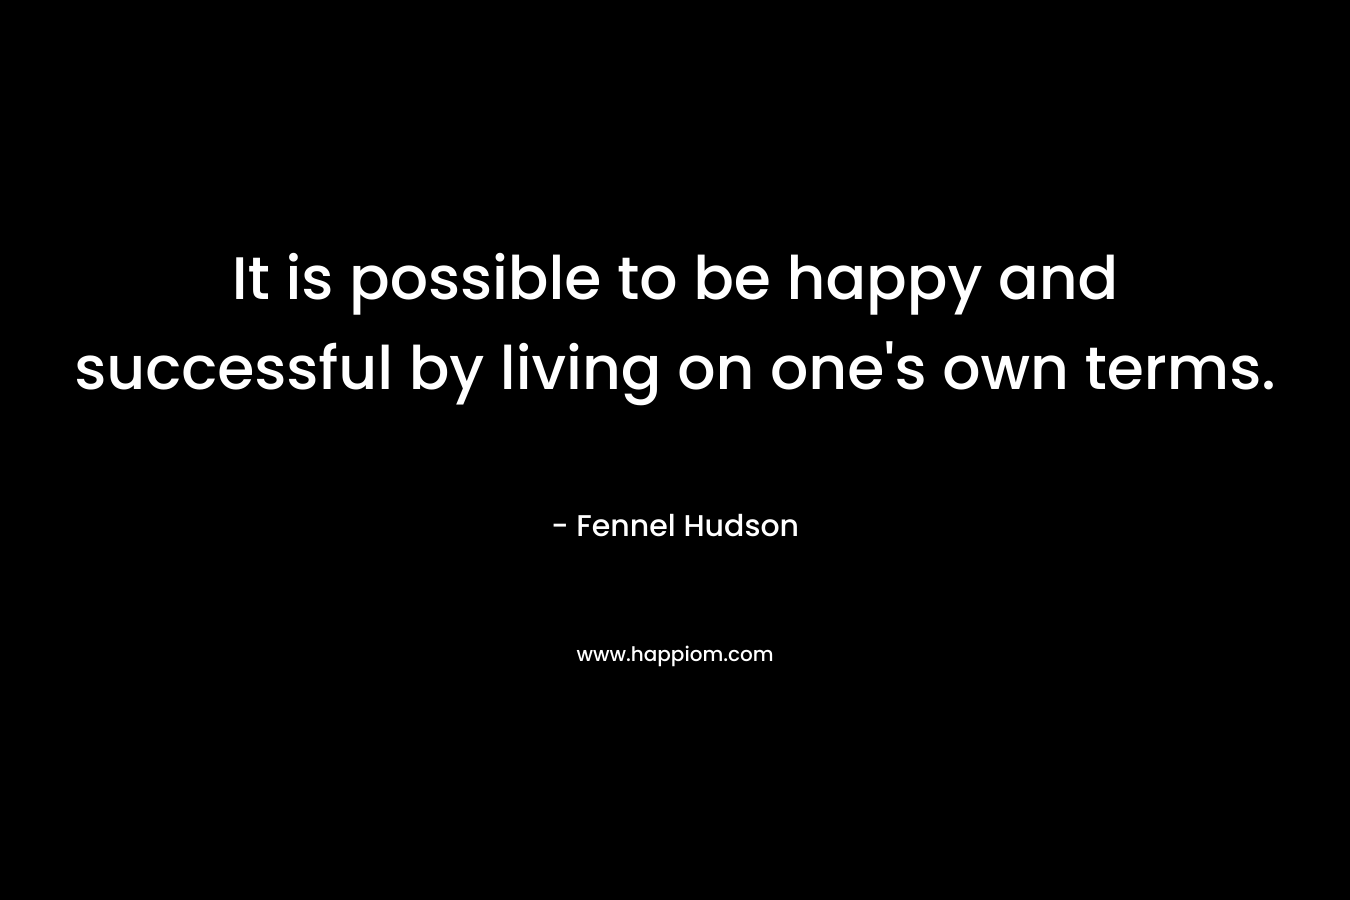 It is possible to be happy and successful by living on one's own terms.